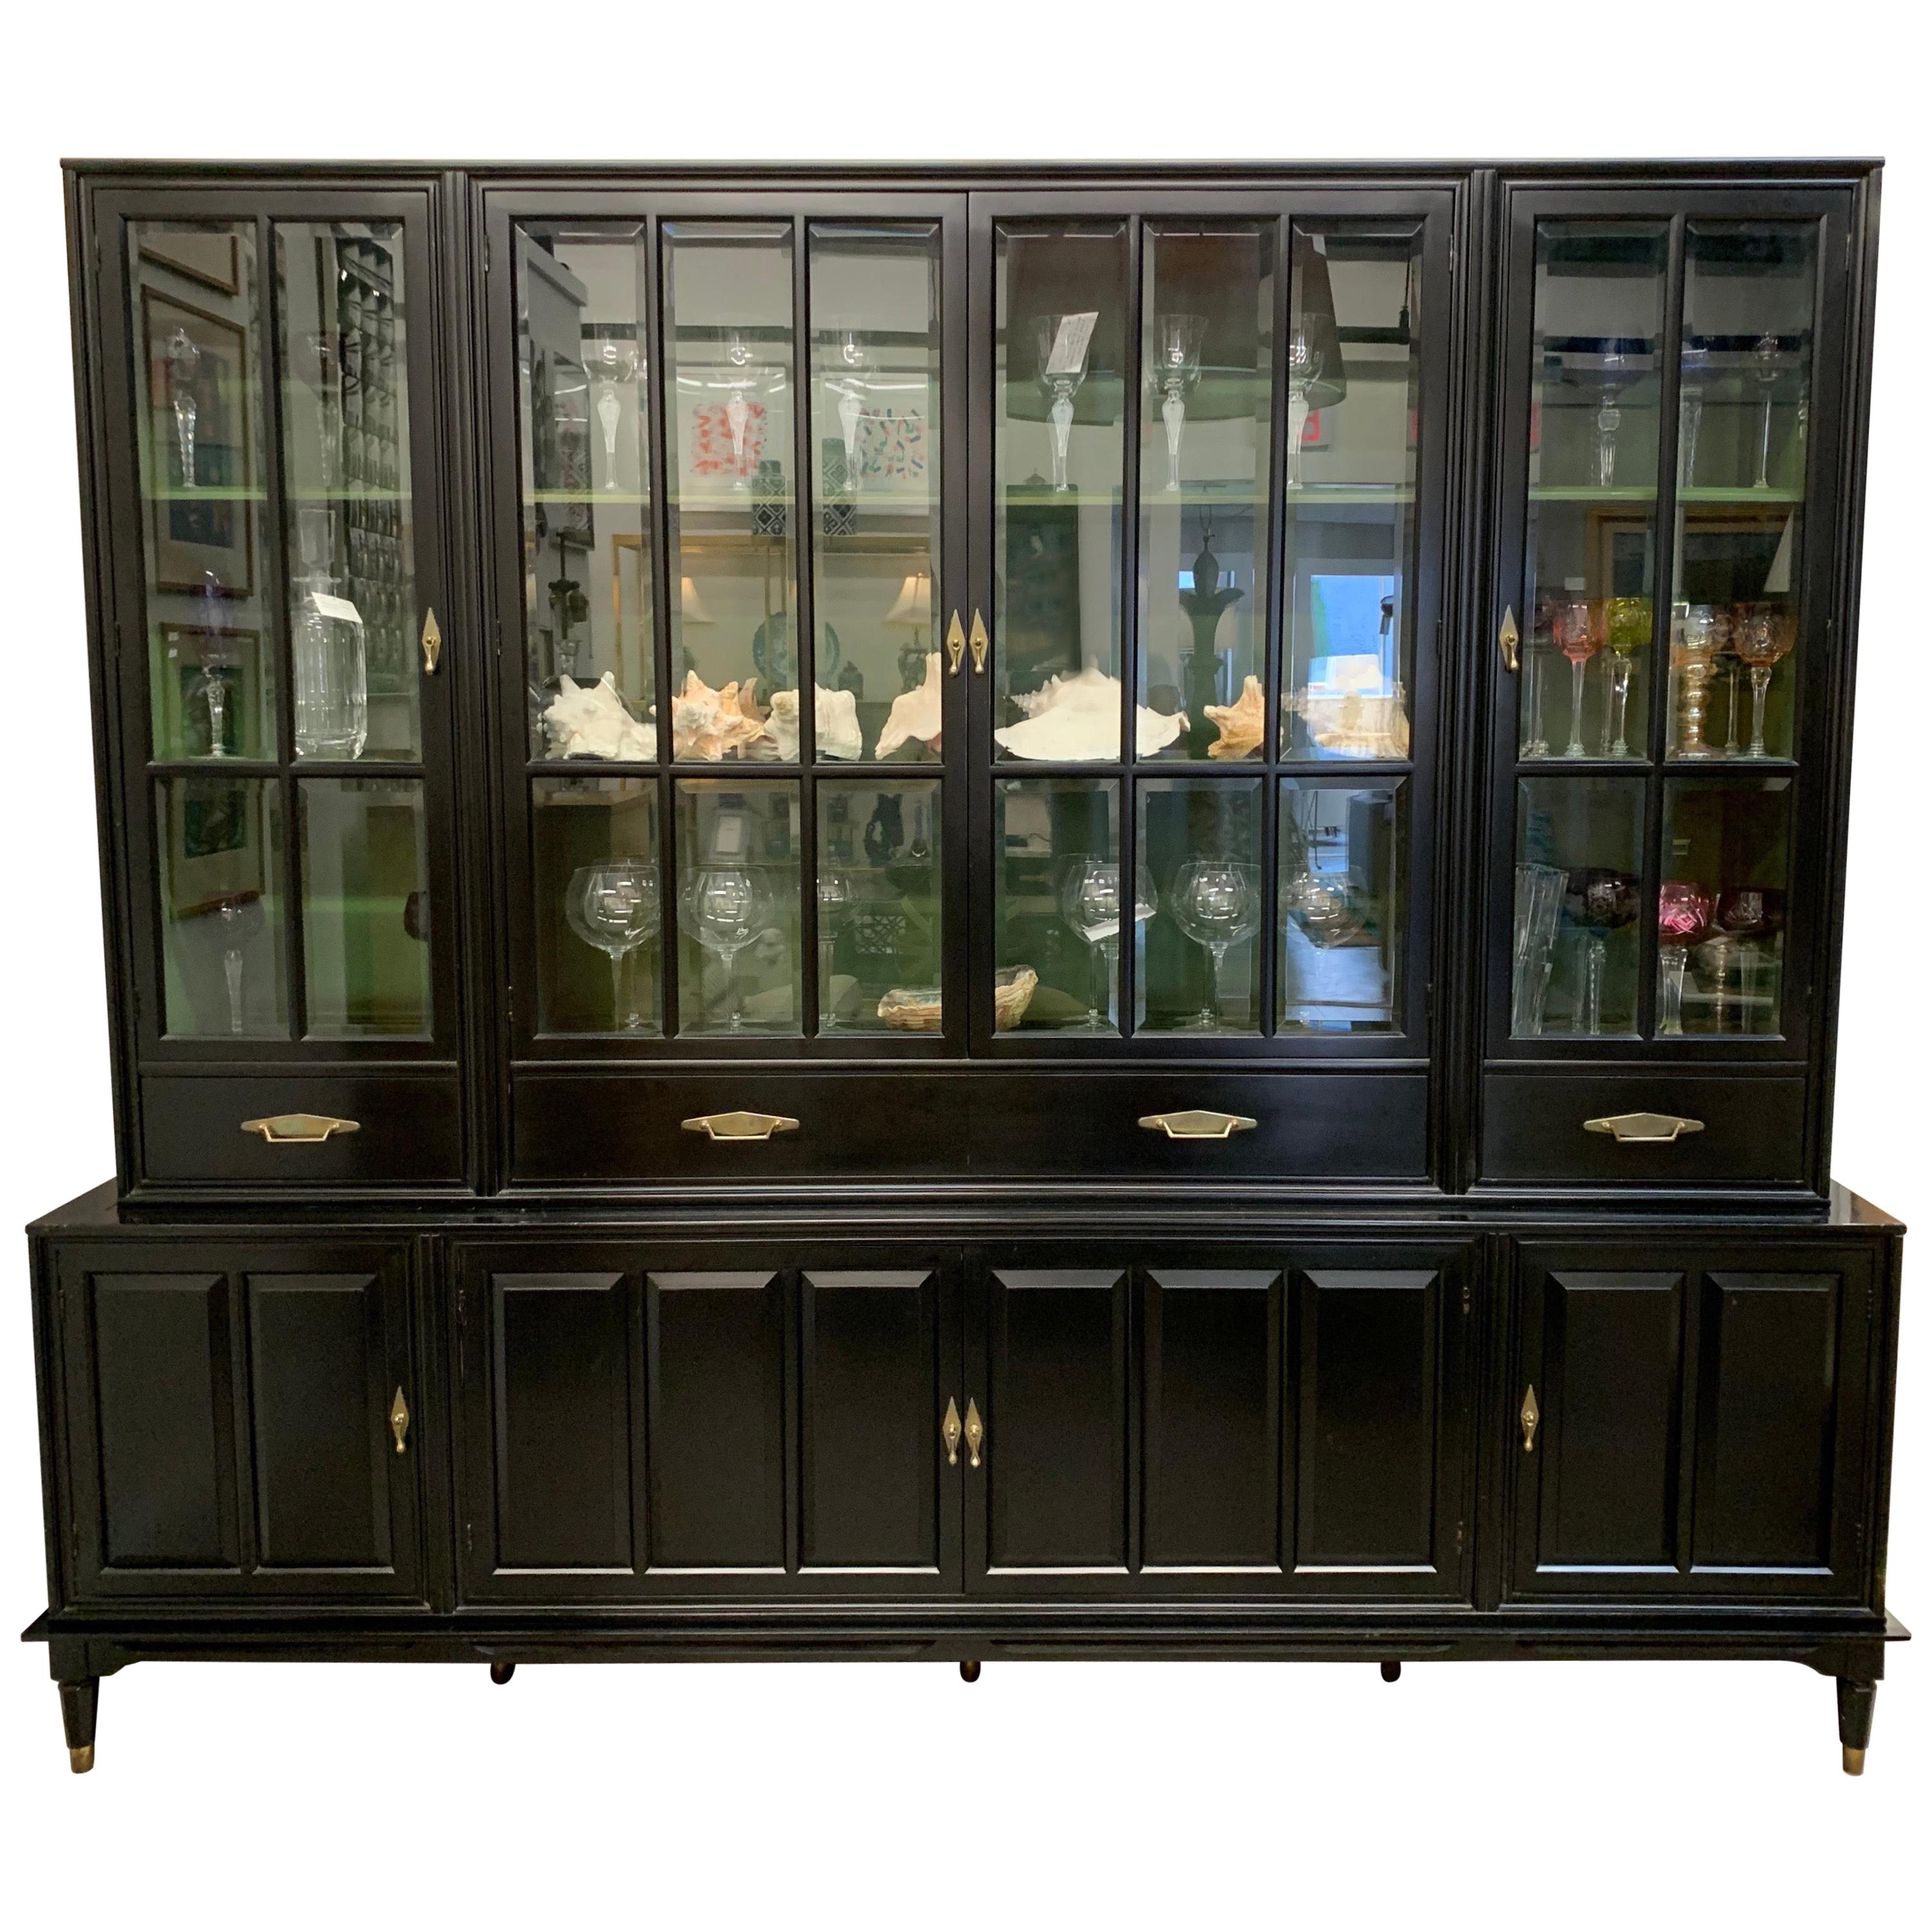 Black Midcentury Bookcase Display Cabinet Sideboard Union National, New York